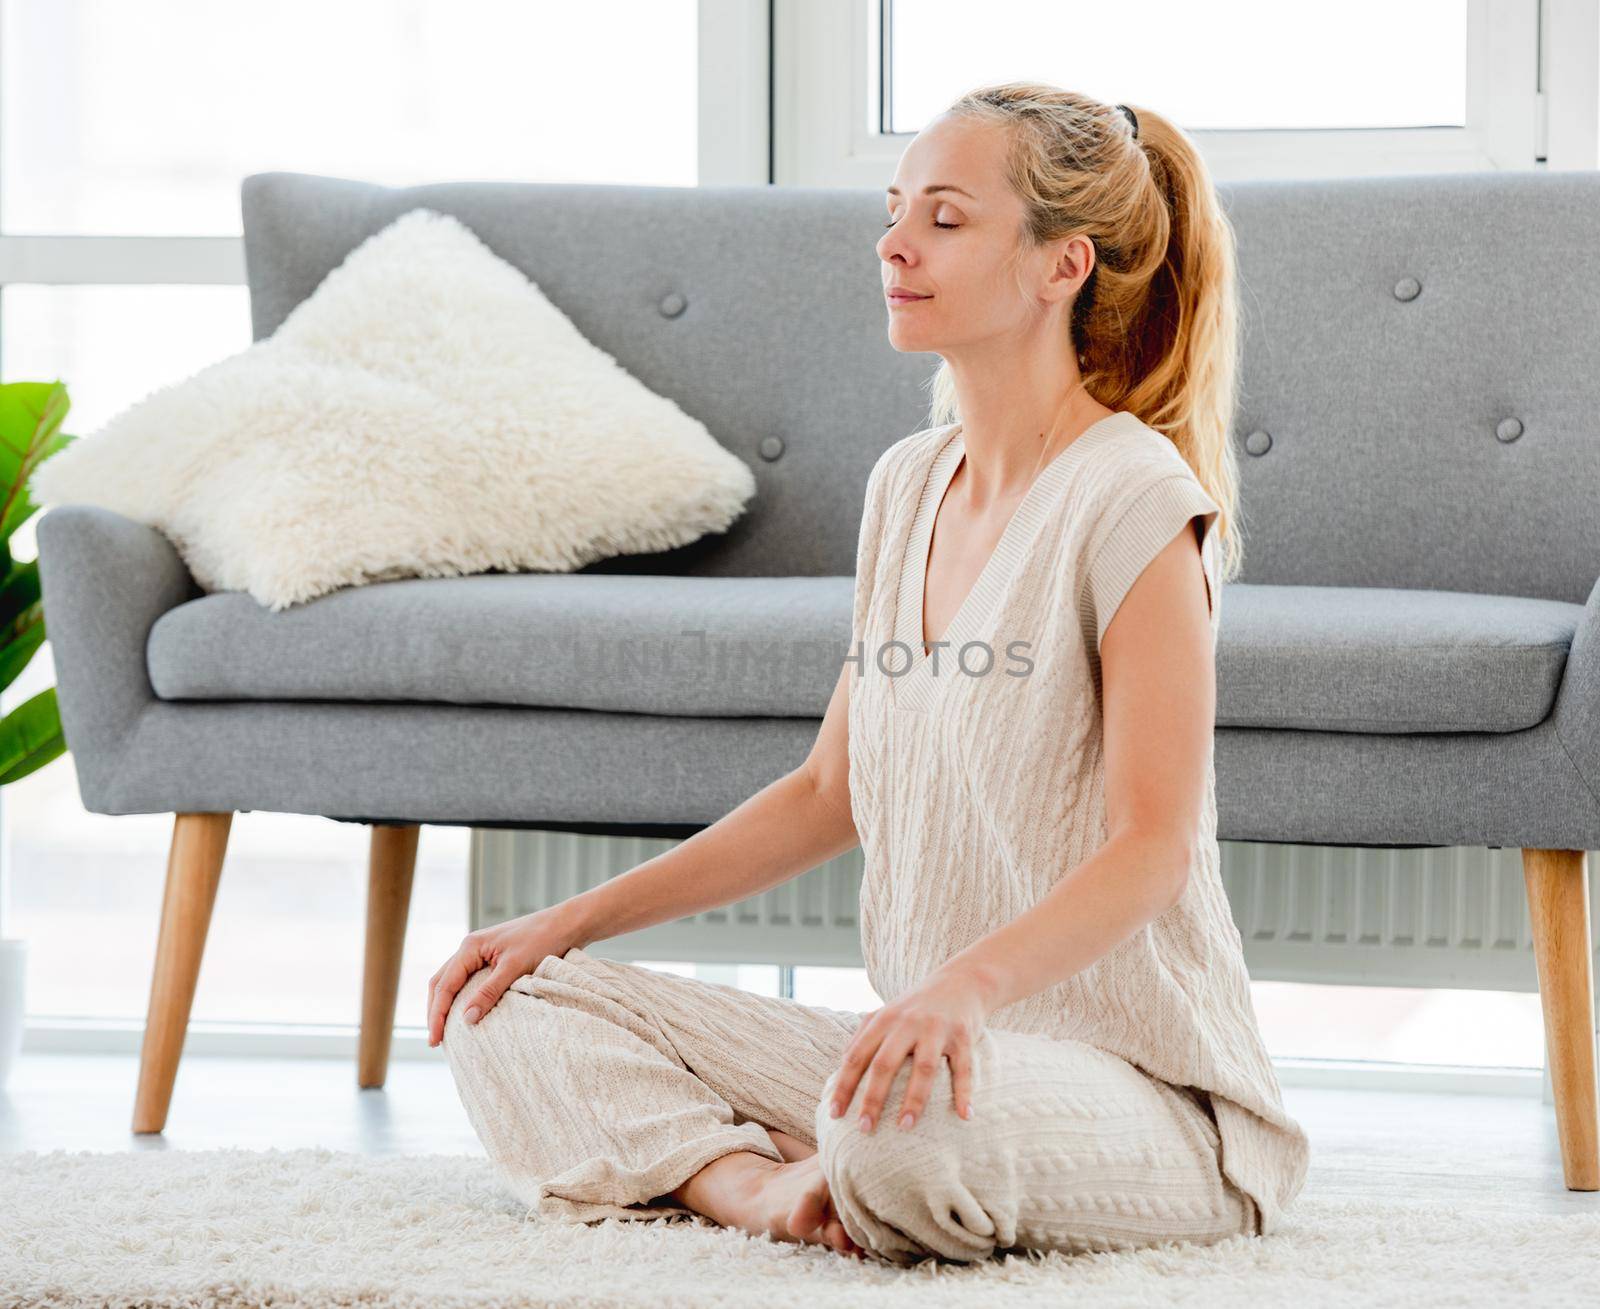 Girl meditates sitting on the floor with legs crossed during morning yoga workout